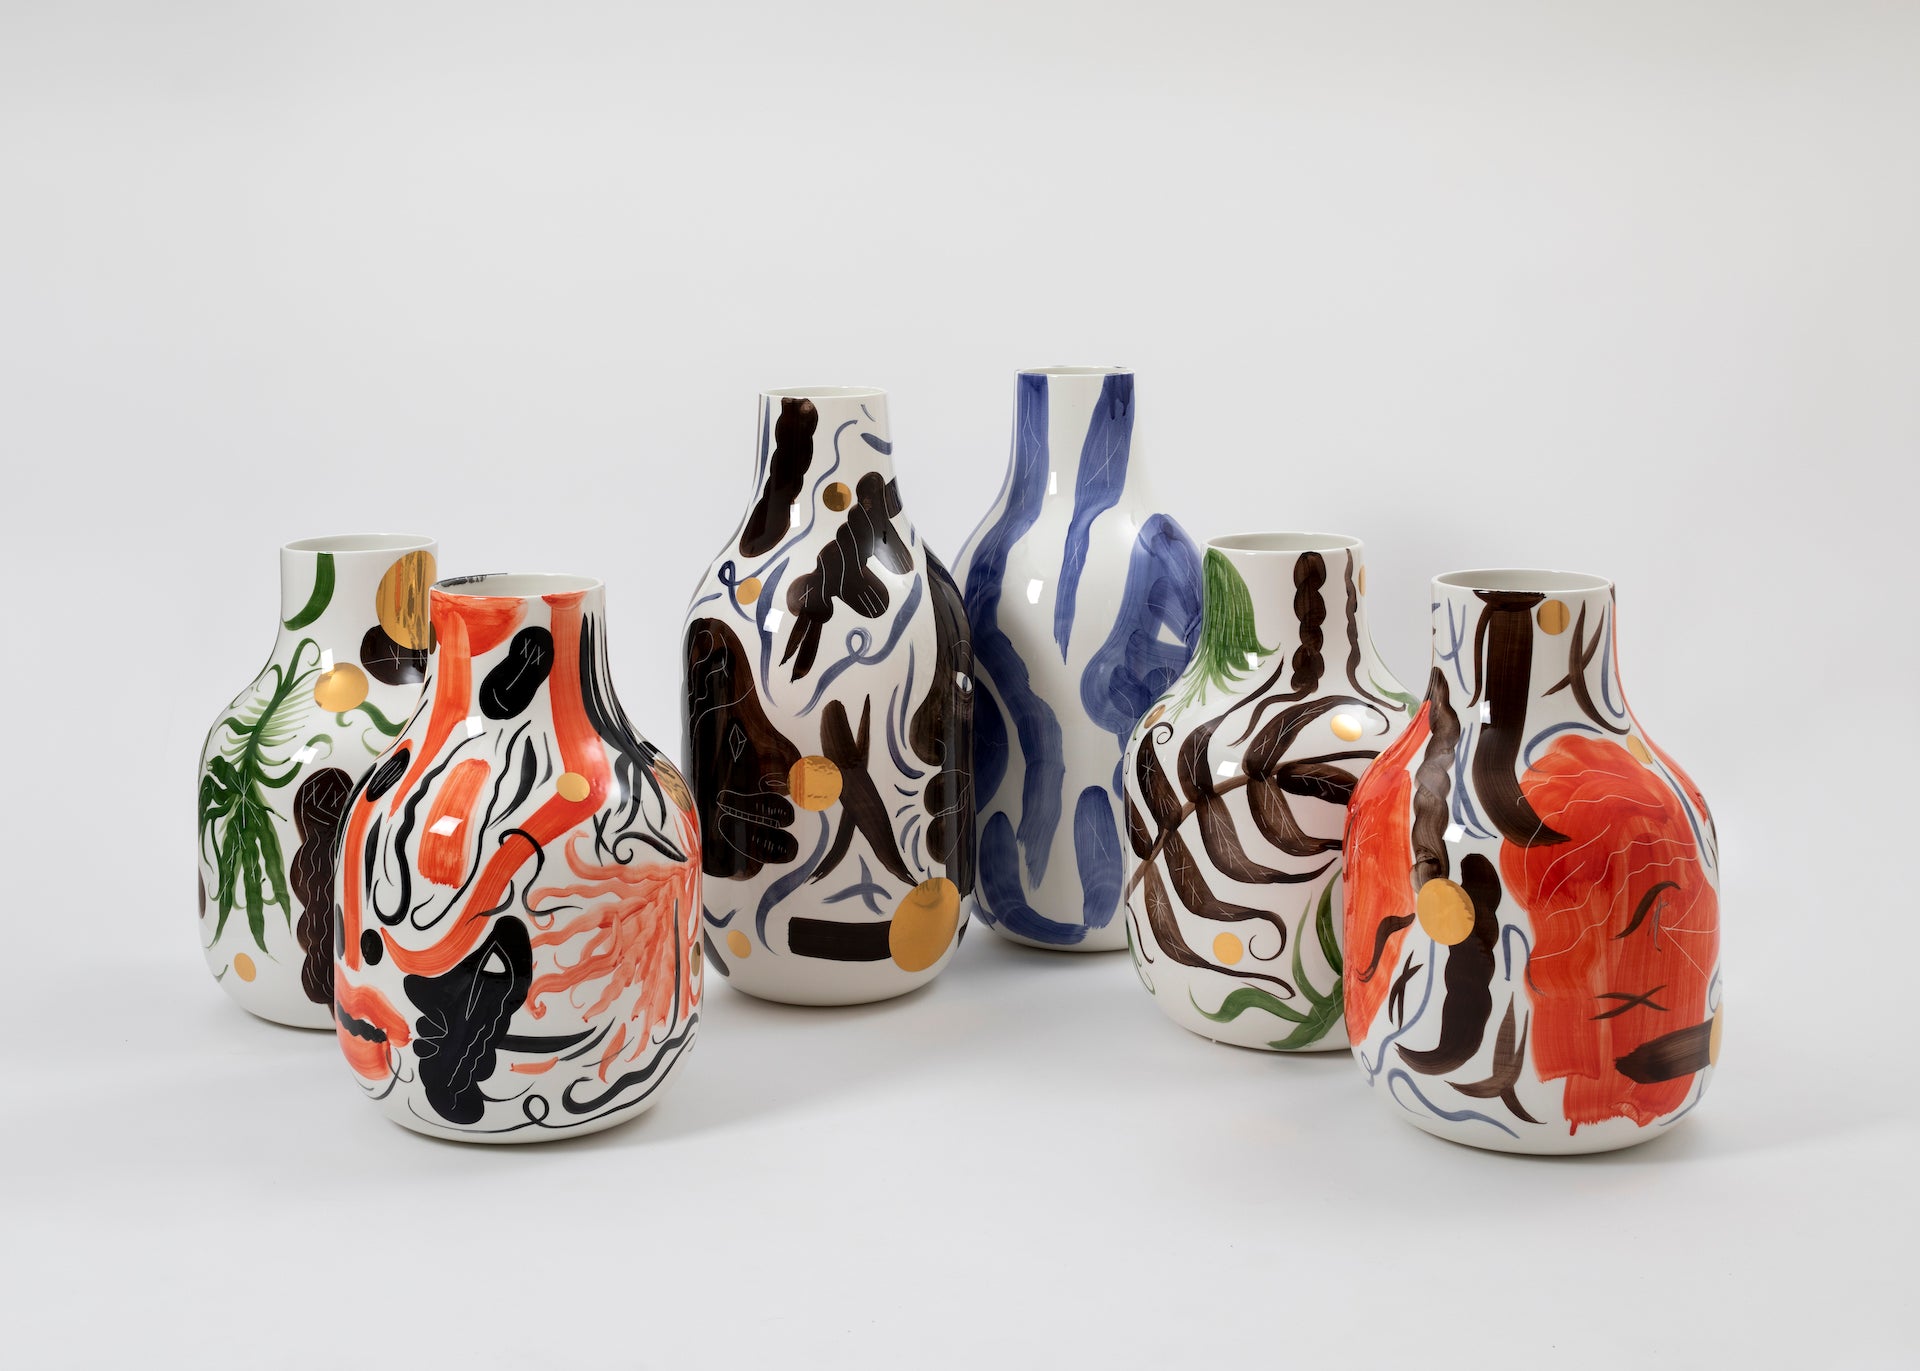 New collection of hand painted ceramic vases by Jaime Hayon for Galerie kreo. Photo © Alexandra de Cossette; courtesy of Galerie kreo